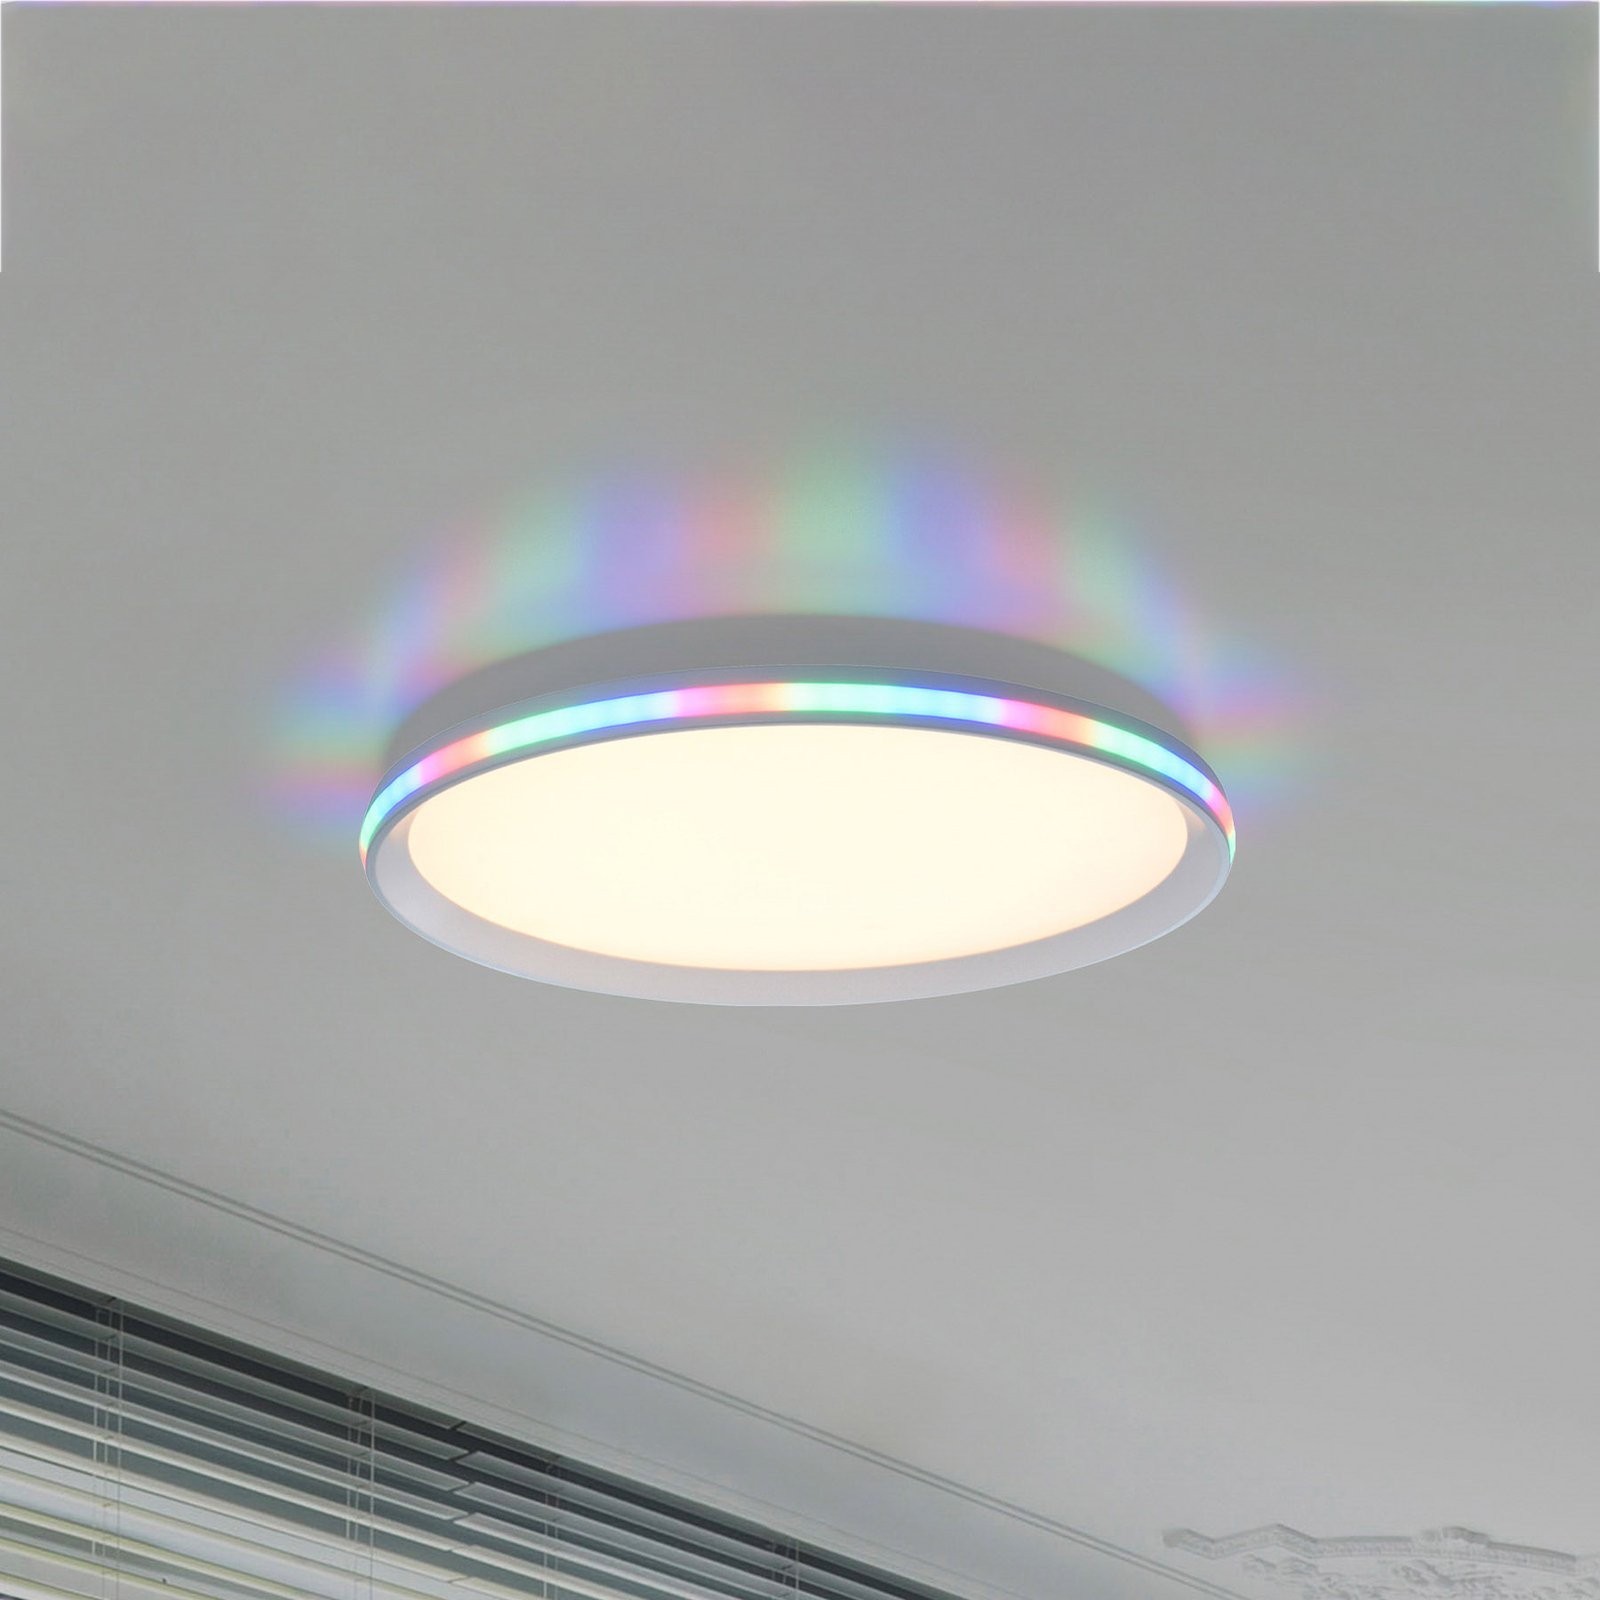 Galactica remote control LED ceiling lamp RGB/CCT